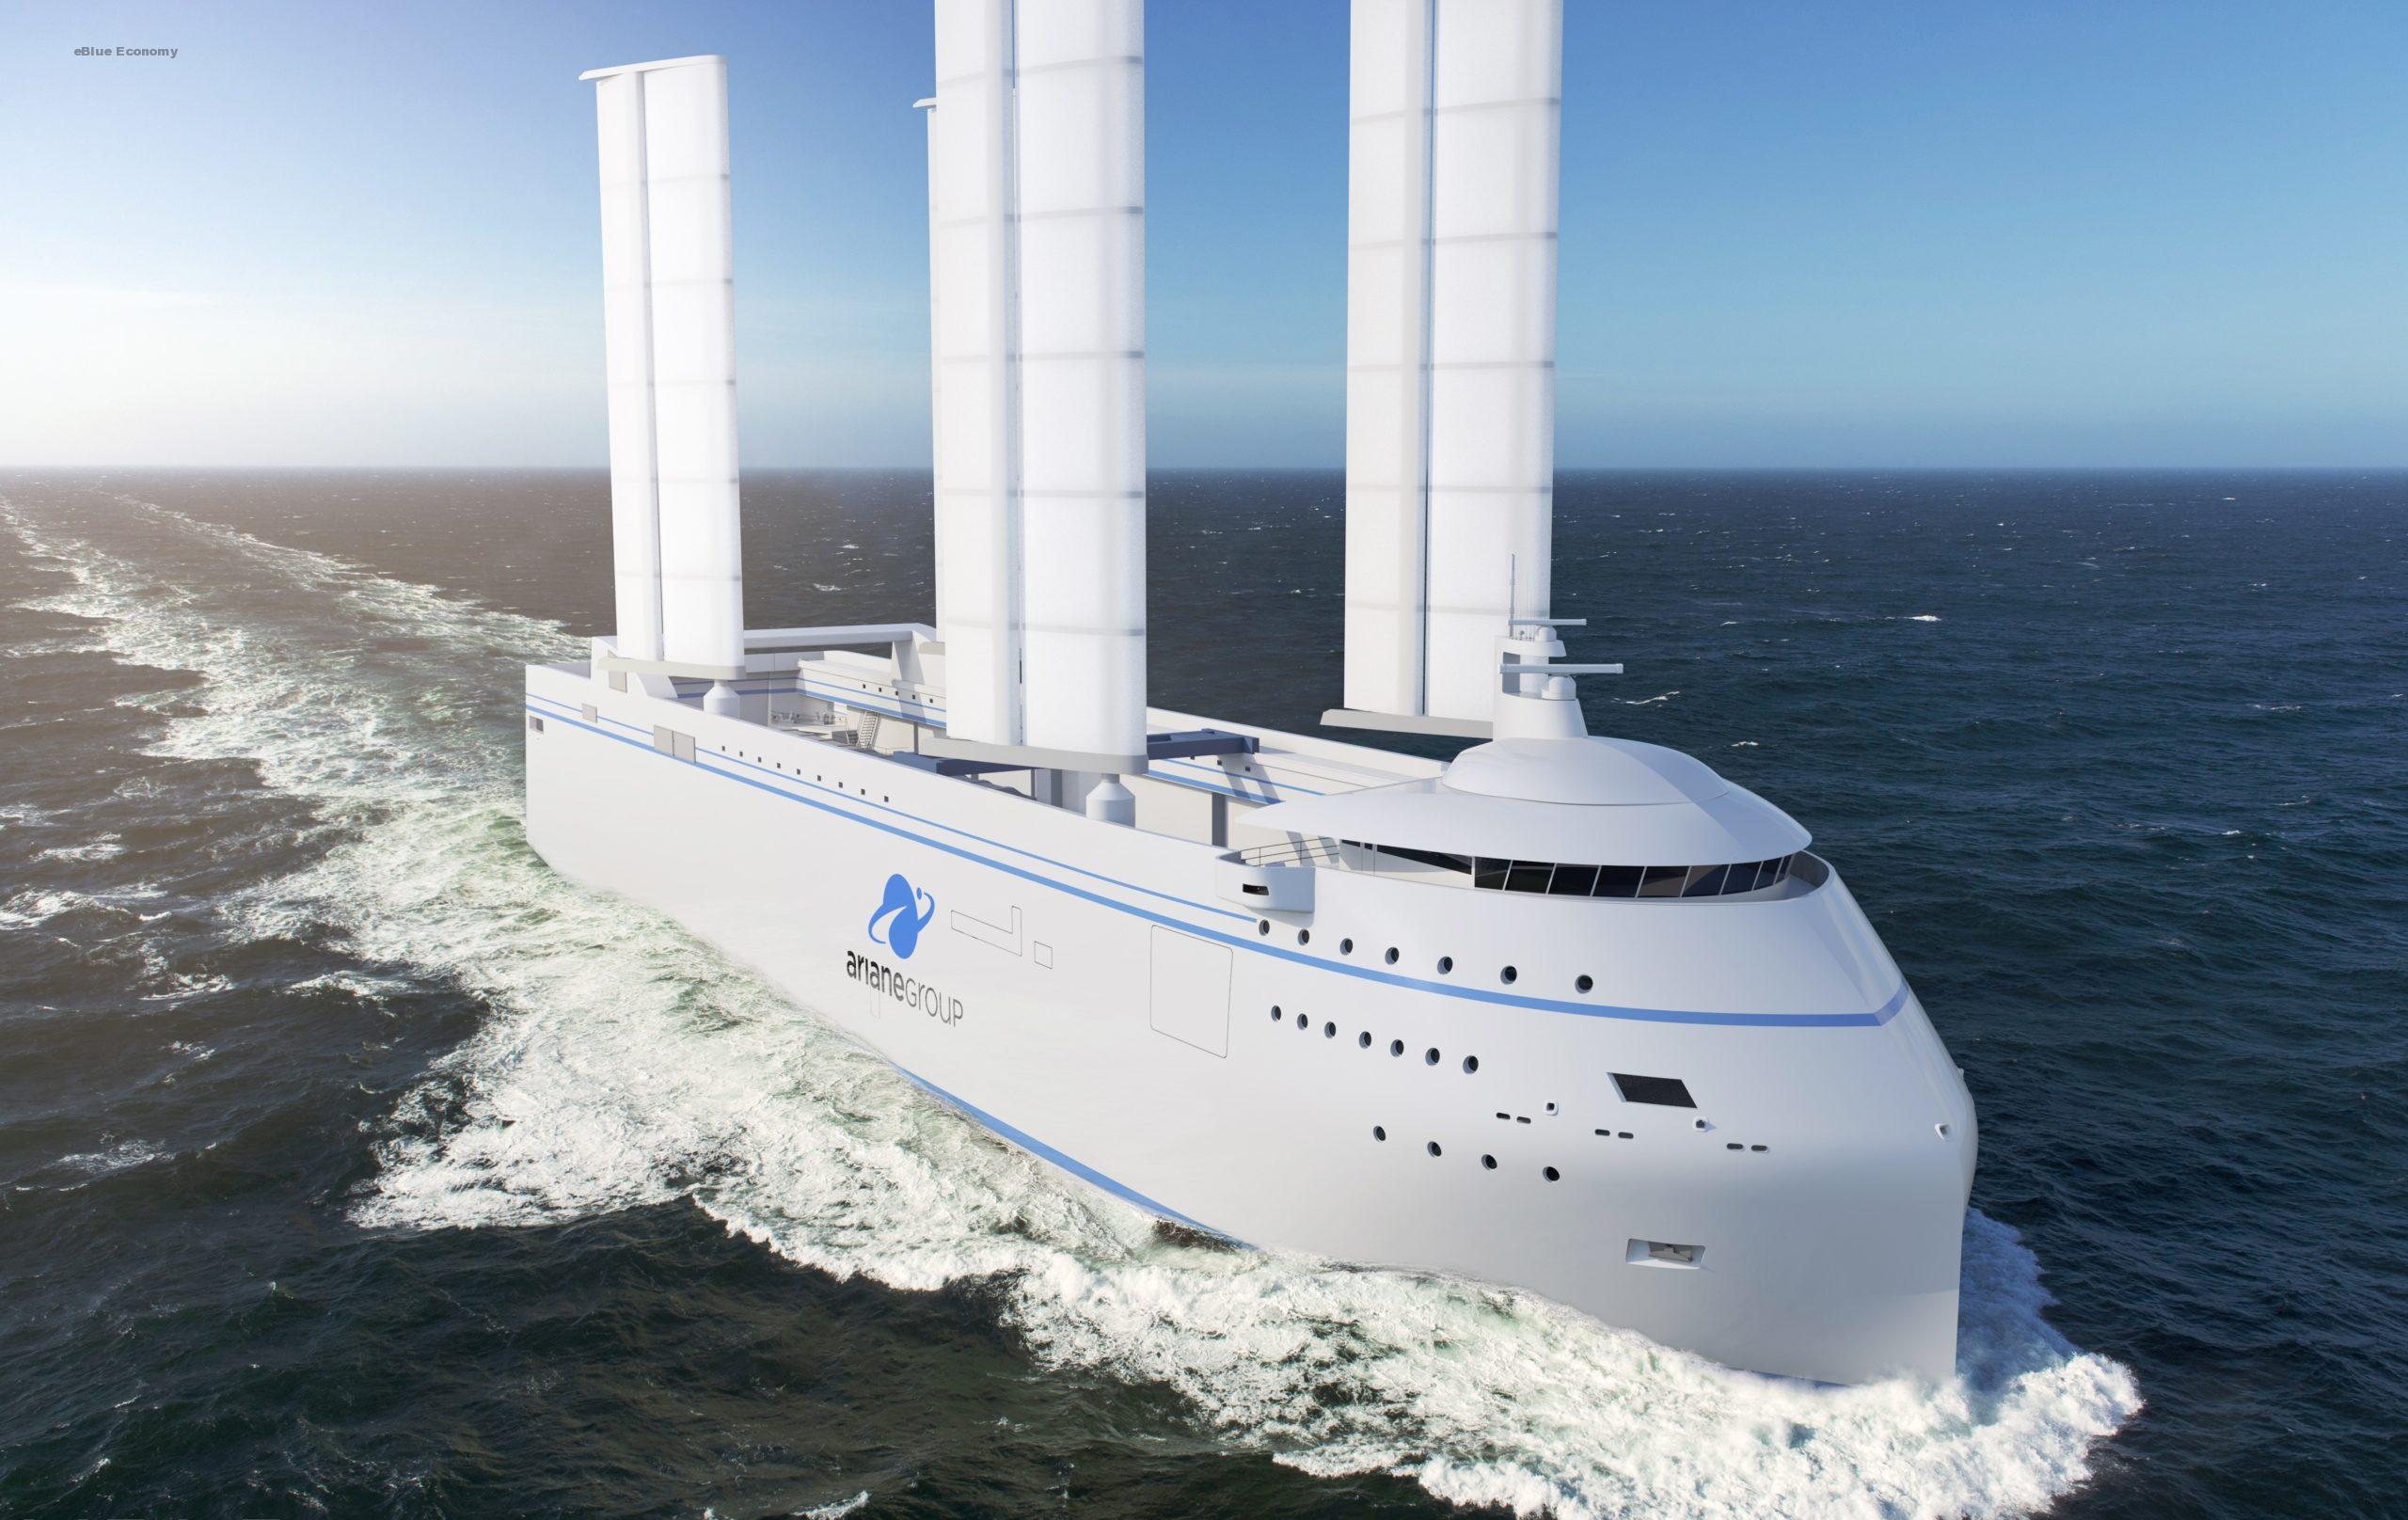 eBlue_economy_ AYRO chooses Caen in Normandy to produce its Oceanwings®, wind propulsion system for maritime transport